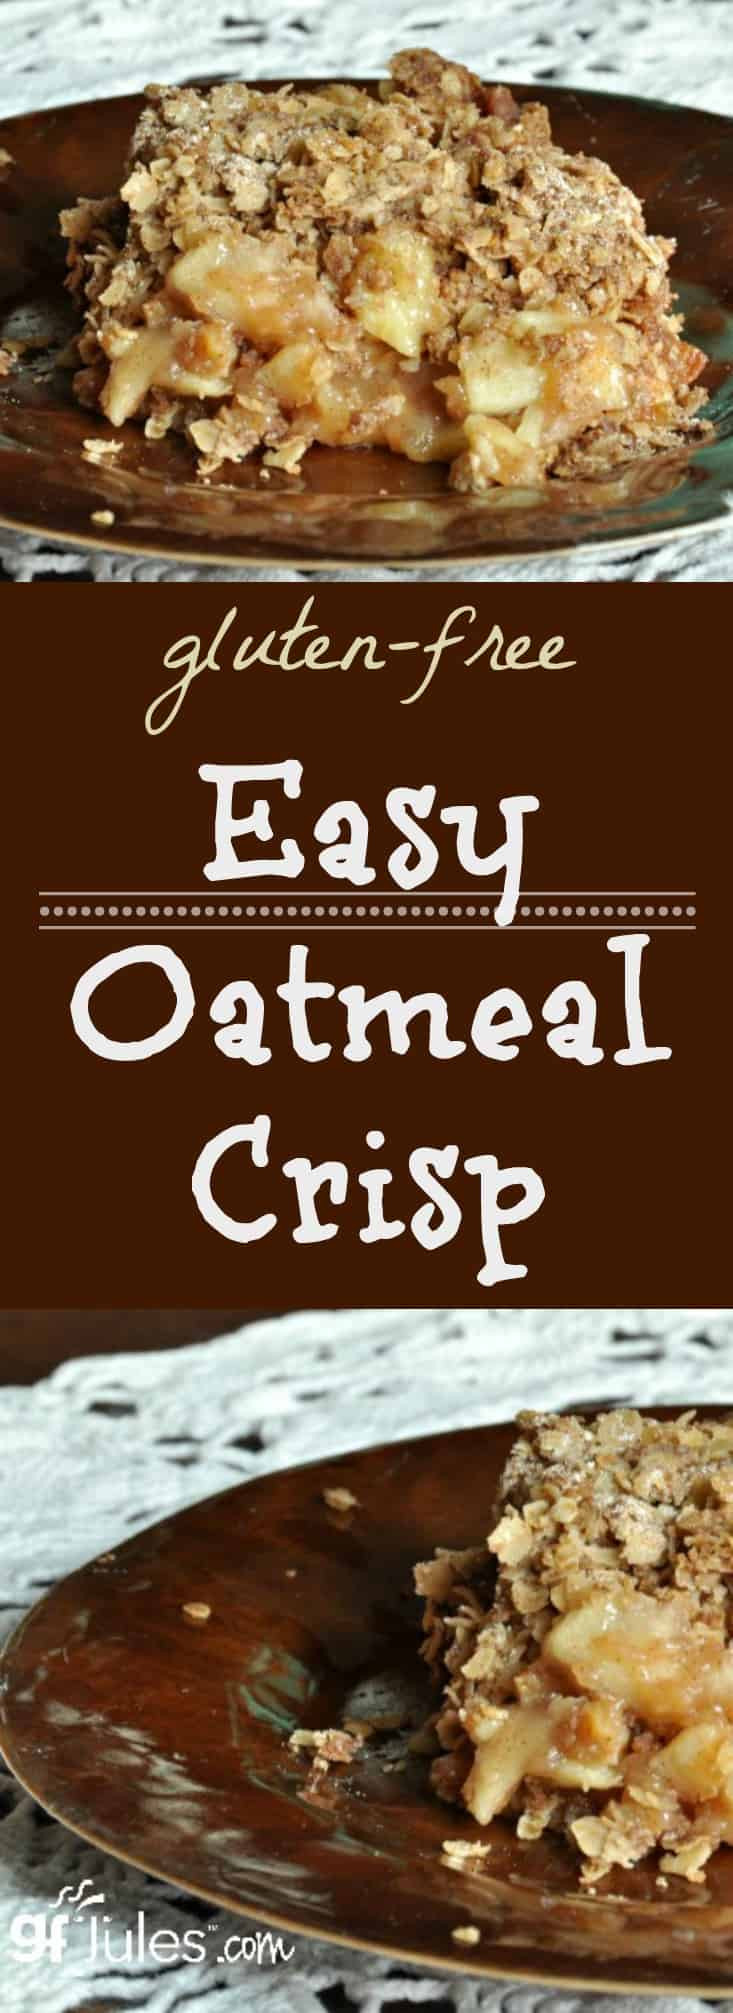 Gluten Free Oatmeal Recipes
 Apple Quince Easy Oatmeal Crisp Gluten free recipes